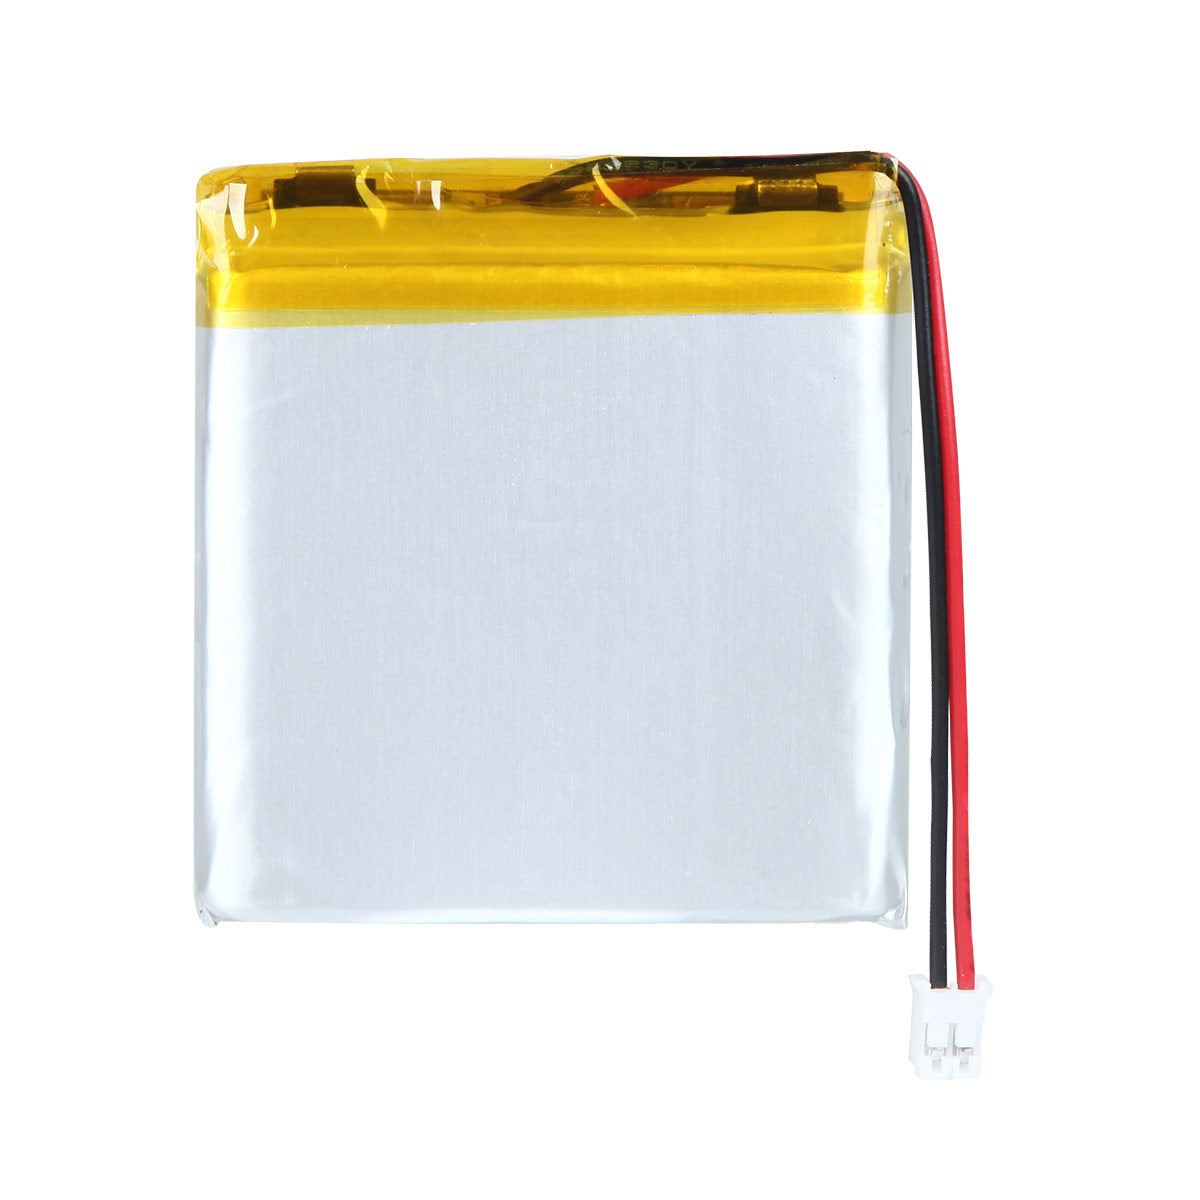 YDL 3.7V 2400mAh 805050 Rechargeable Lithium Polymer Battery